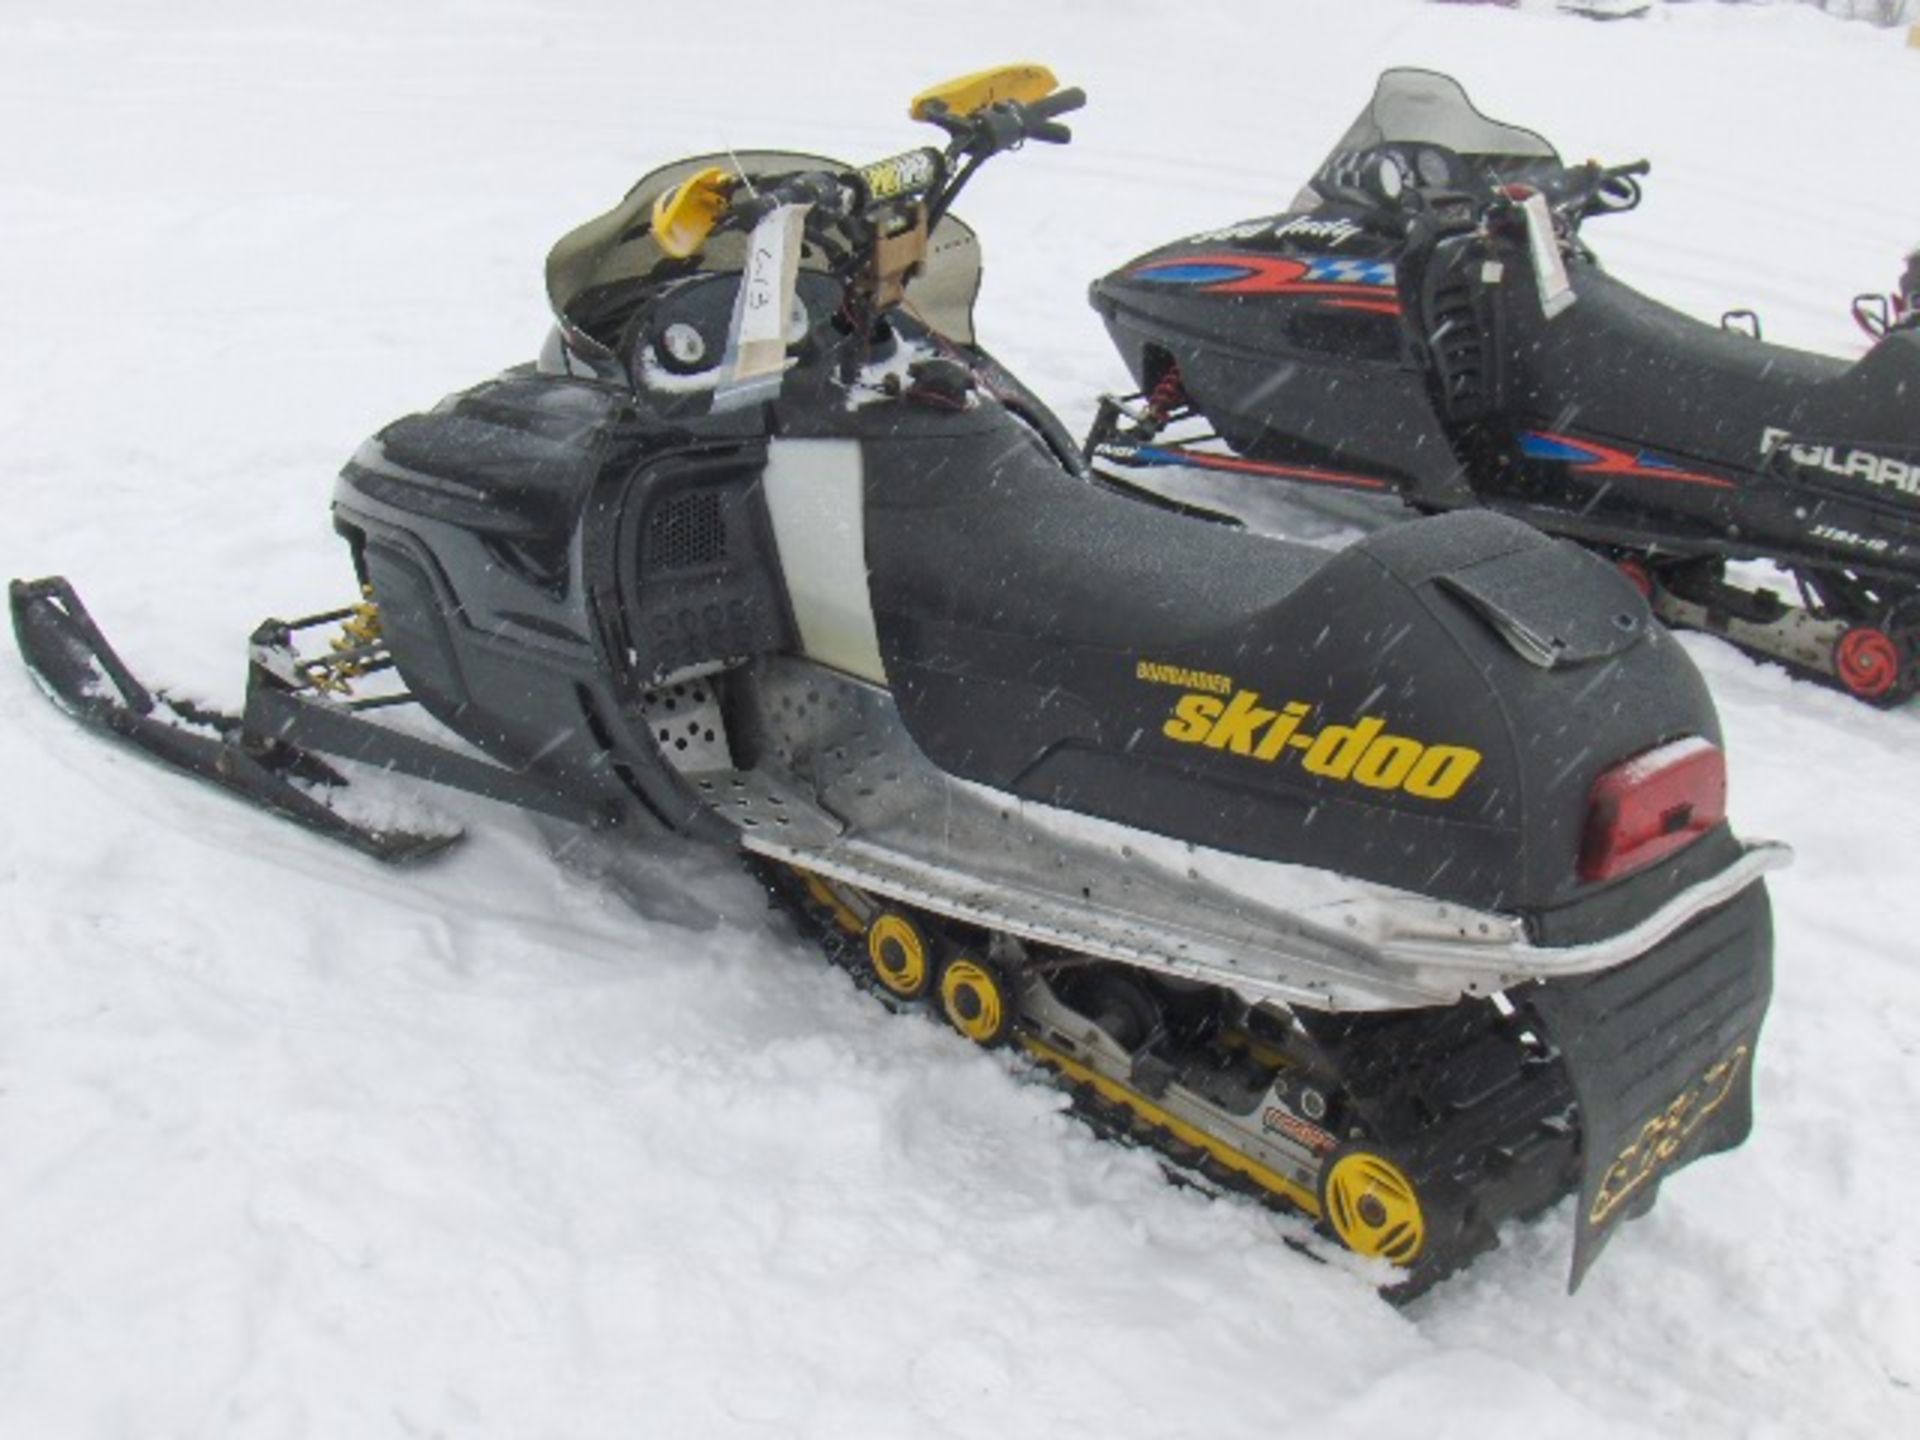 2000 SKI DOO 600 MXZ  2BPS16228YV000117 snowmobile, Ripsaw with dyno port pipe upgrade/suspension - Image 4 of 4